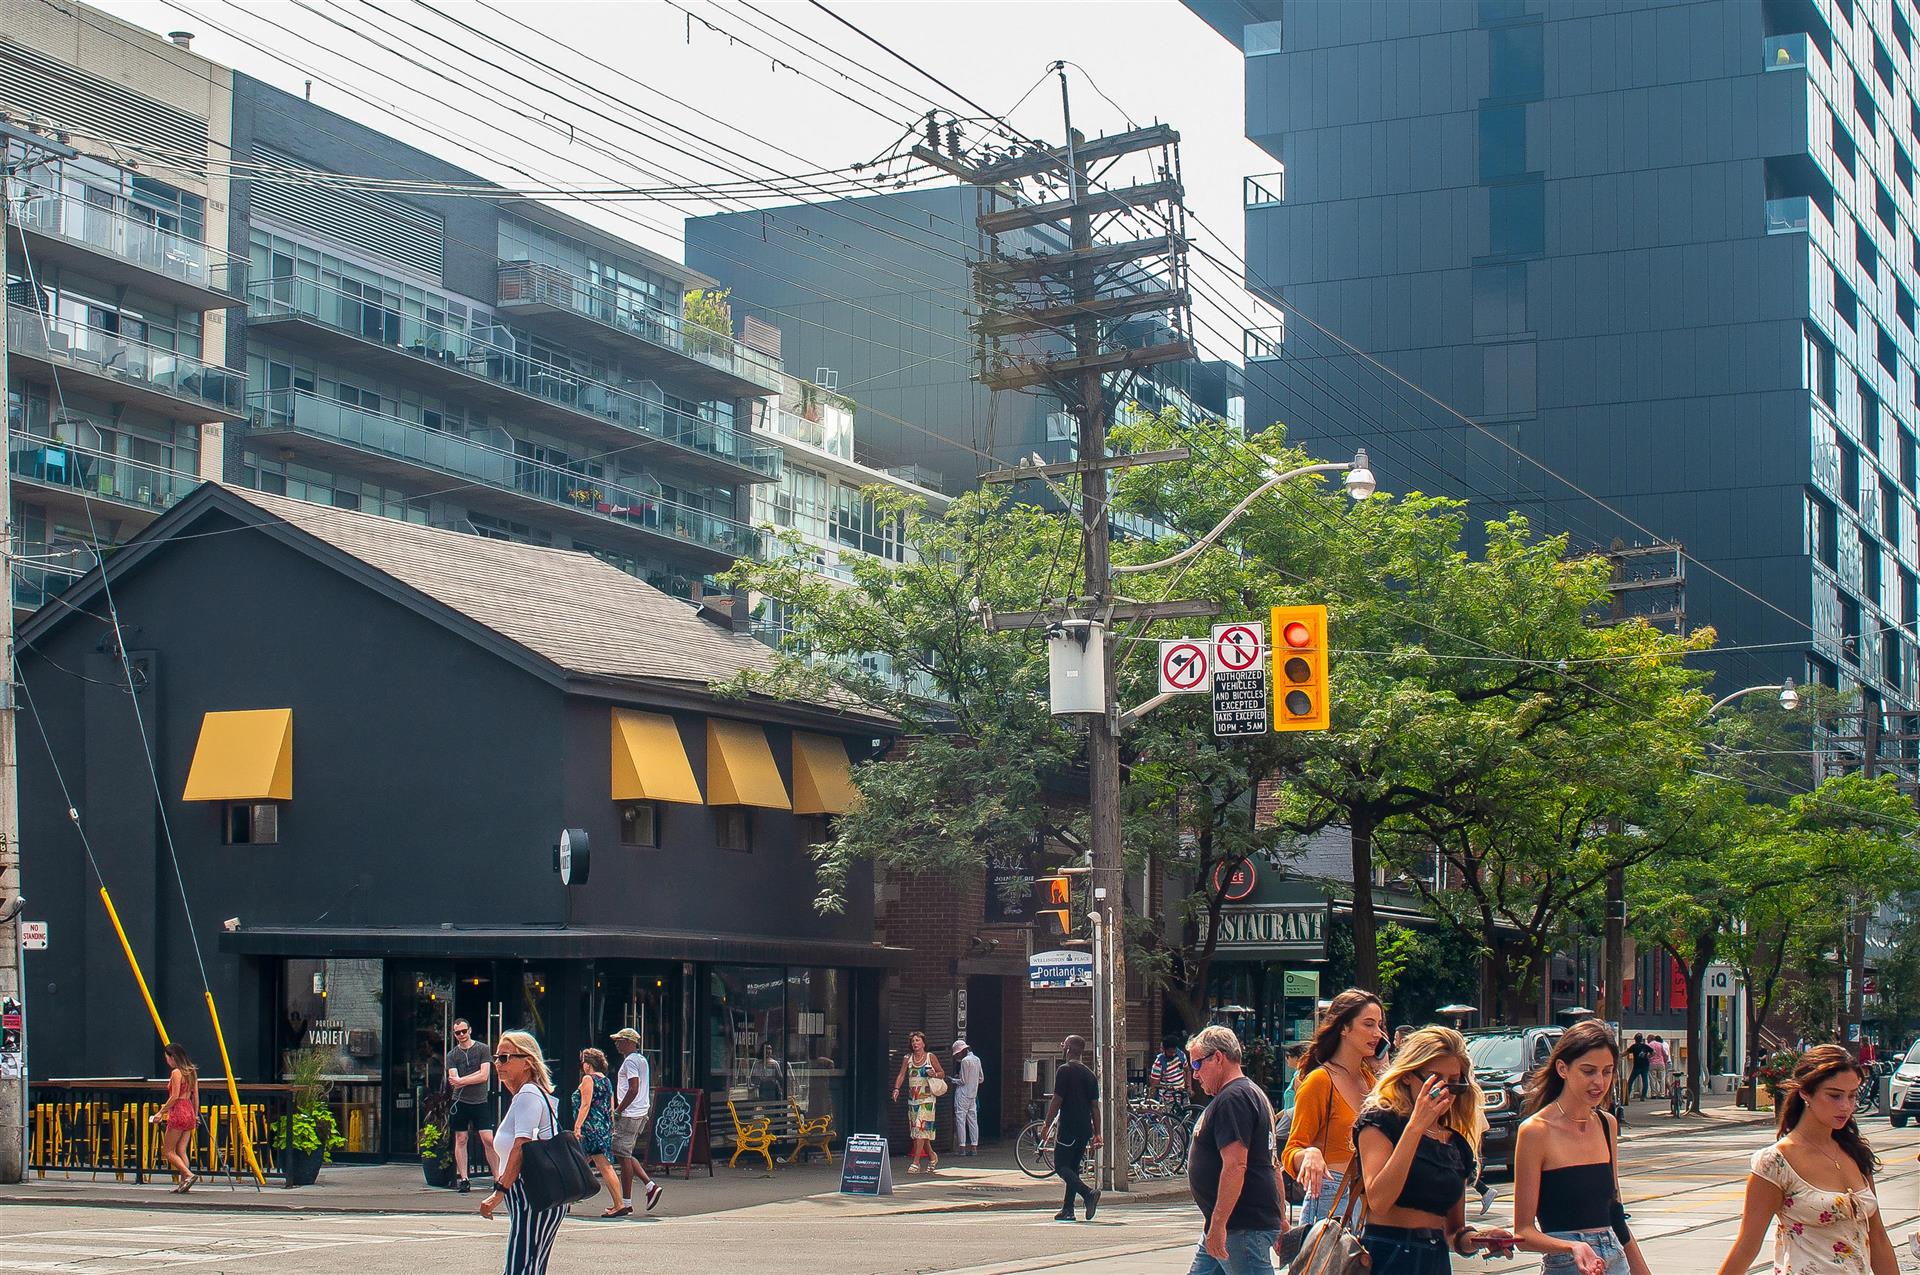 King West